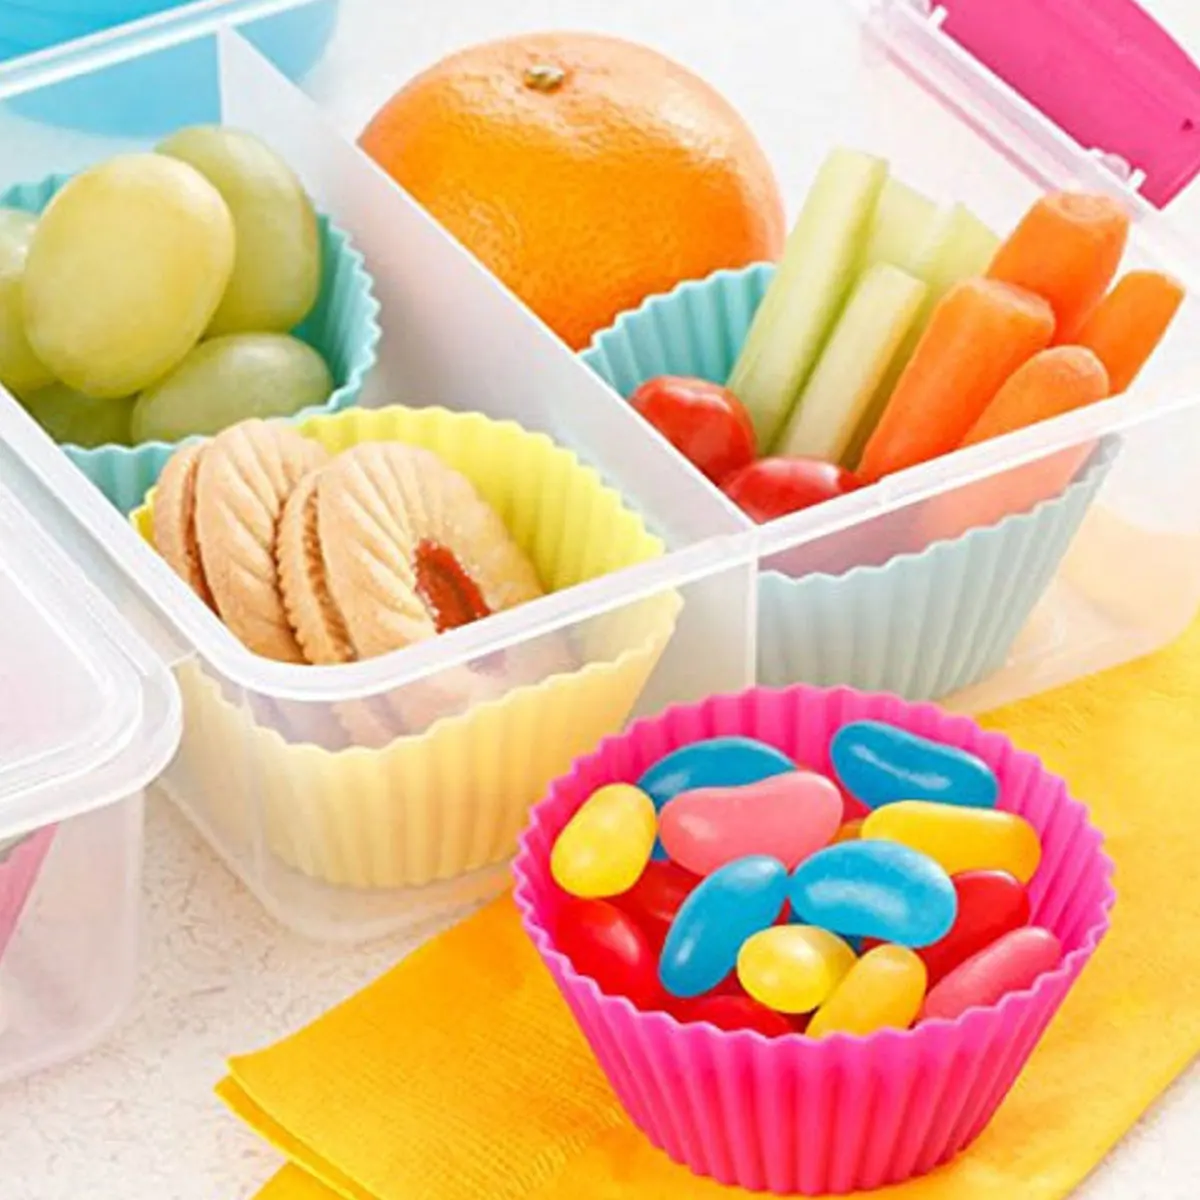 https://ae01.alicdn.com/kf/S6907e5565a644e7fa3d5b459f73ff6df7/78PCS-Silicone-Lunch-Box-Dividers-Bento-Cupcake-Liners-Muffin-Cups-Baking-Cake-Molds-Fruit-Fork-Set.jpg